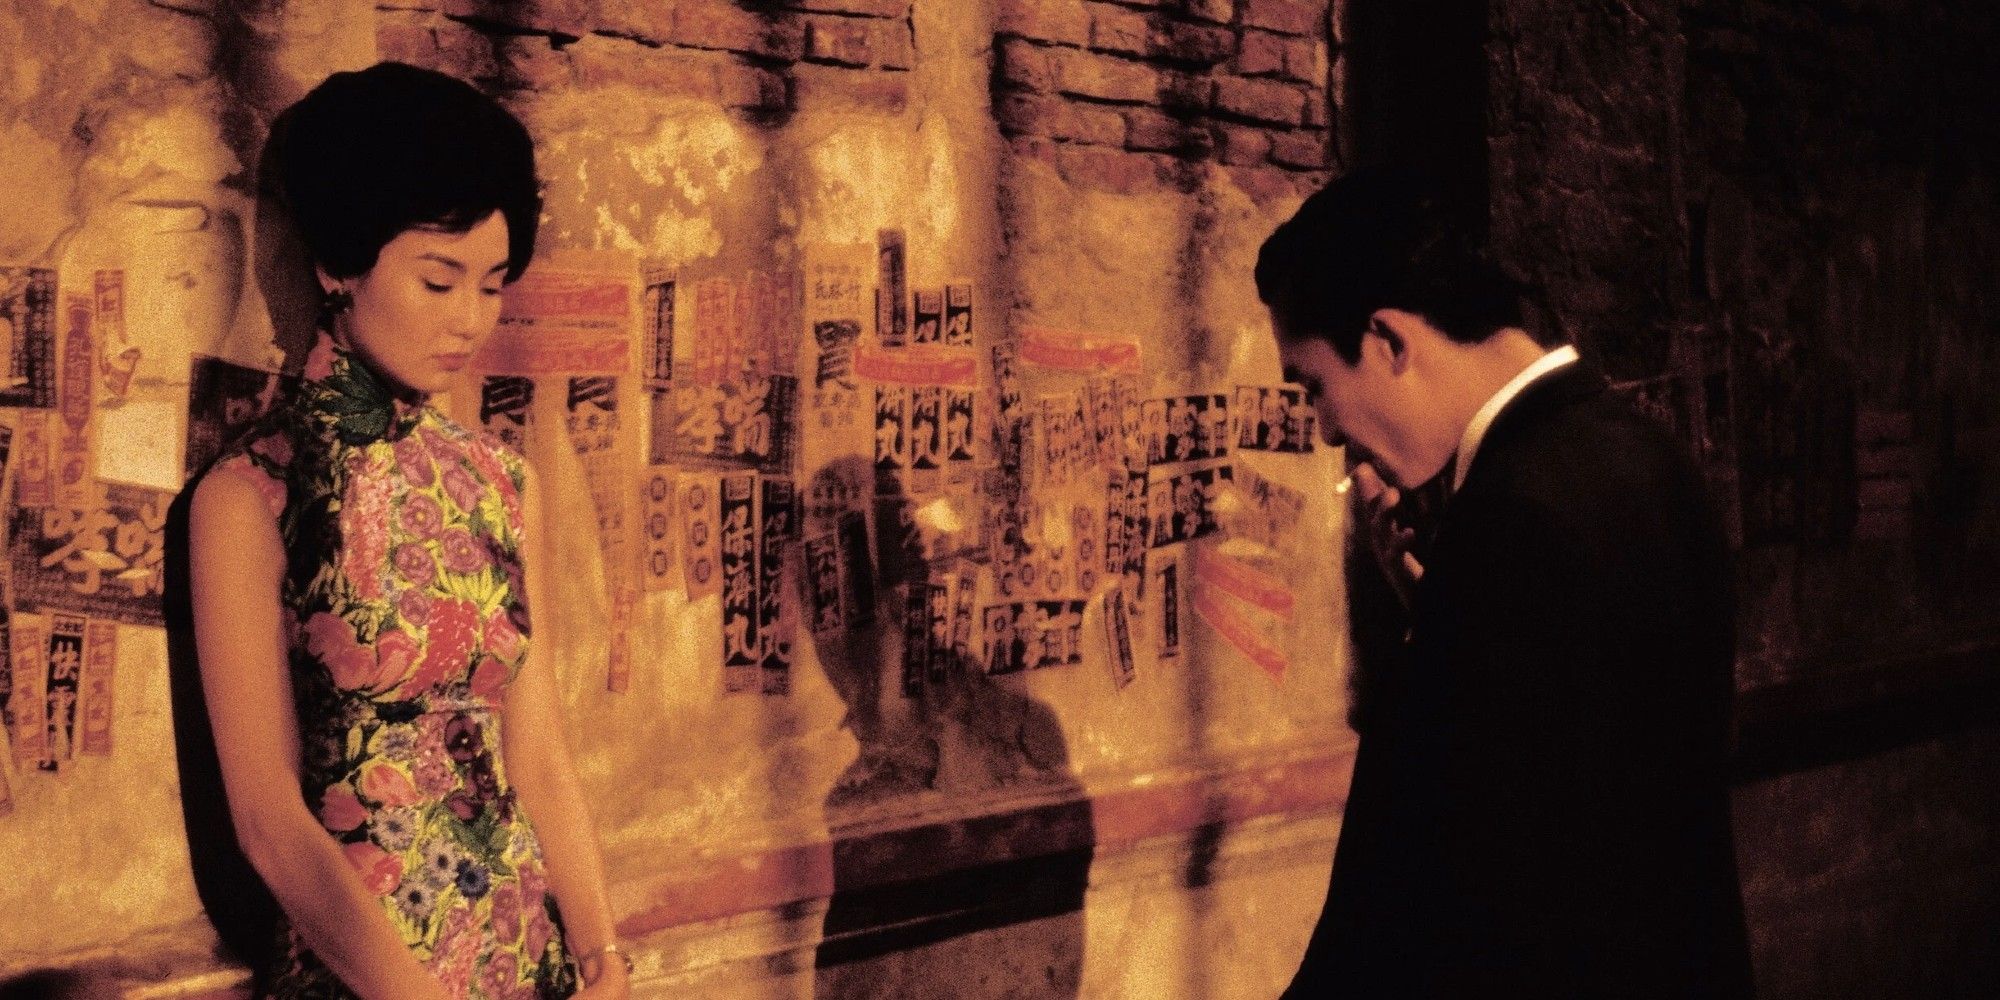 Maggie Cheung and Tony Chiu-Wai Leung in 'In the Mood For Love' (2000)